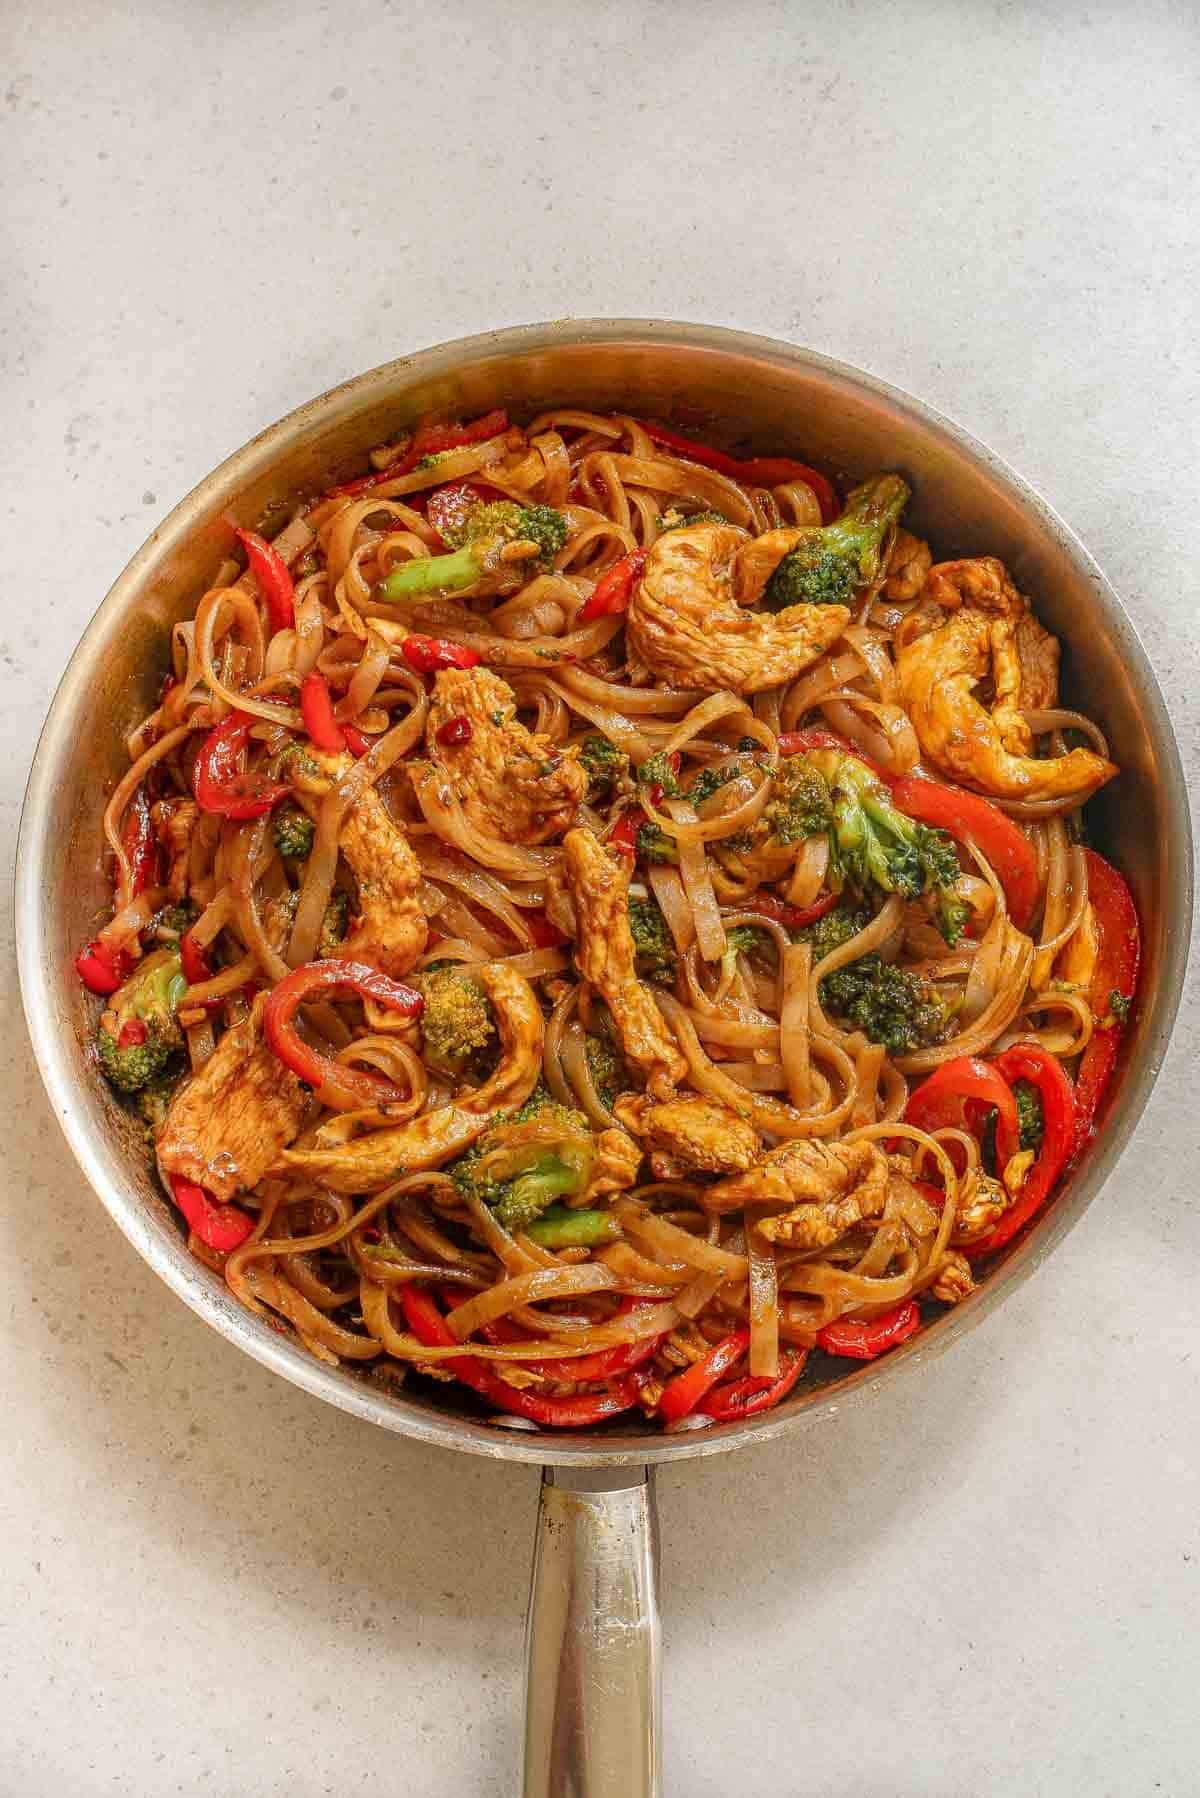 drunken noodles recipe cooked in a silver skillet with rice noodles, chicken and red bell peppers and broccoli in a Asian sauce.